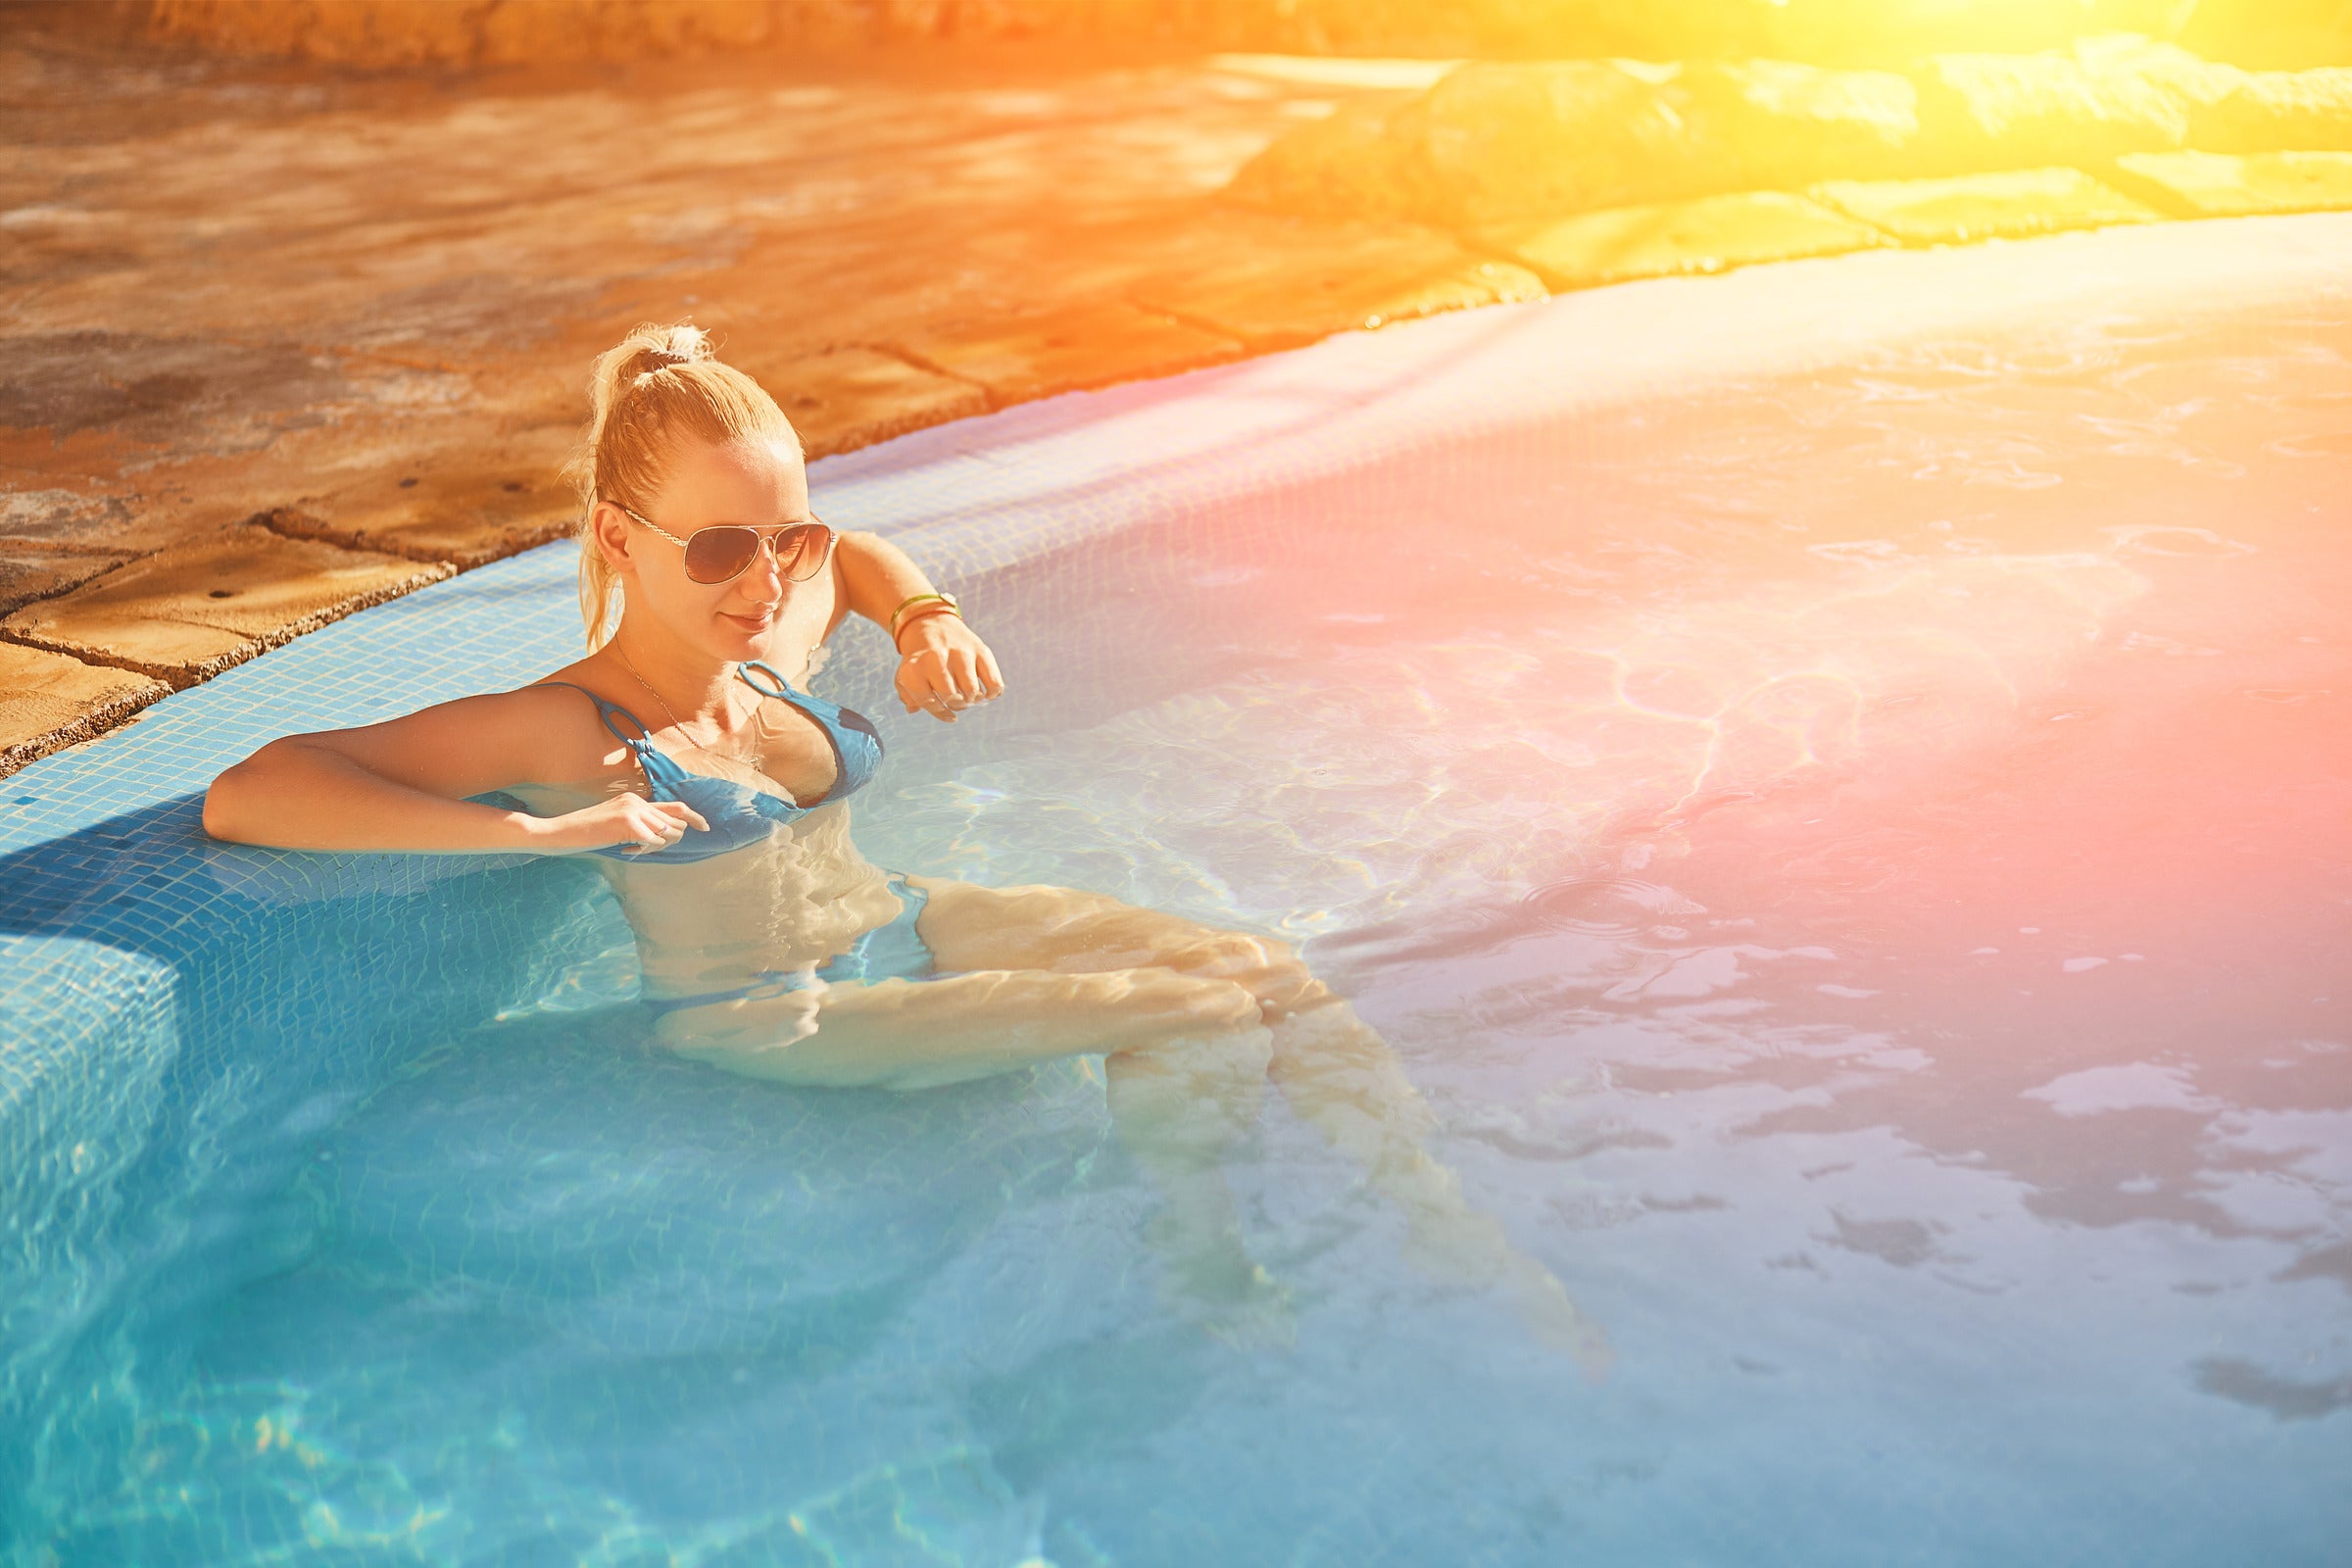 The 7 Reasons You Get a Sunburn While Swimming